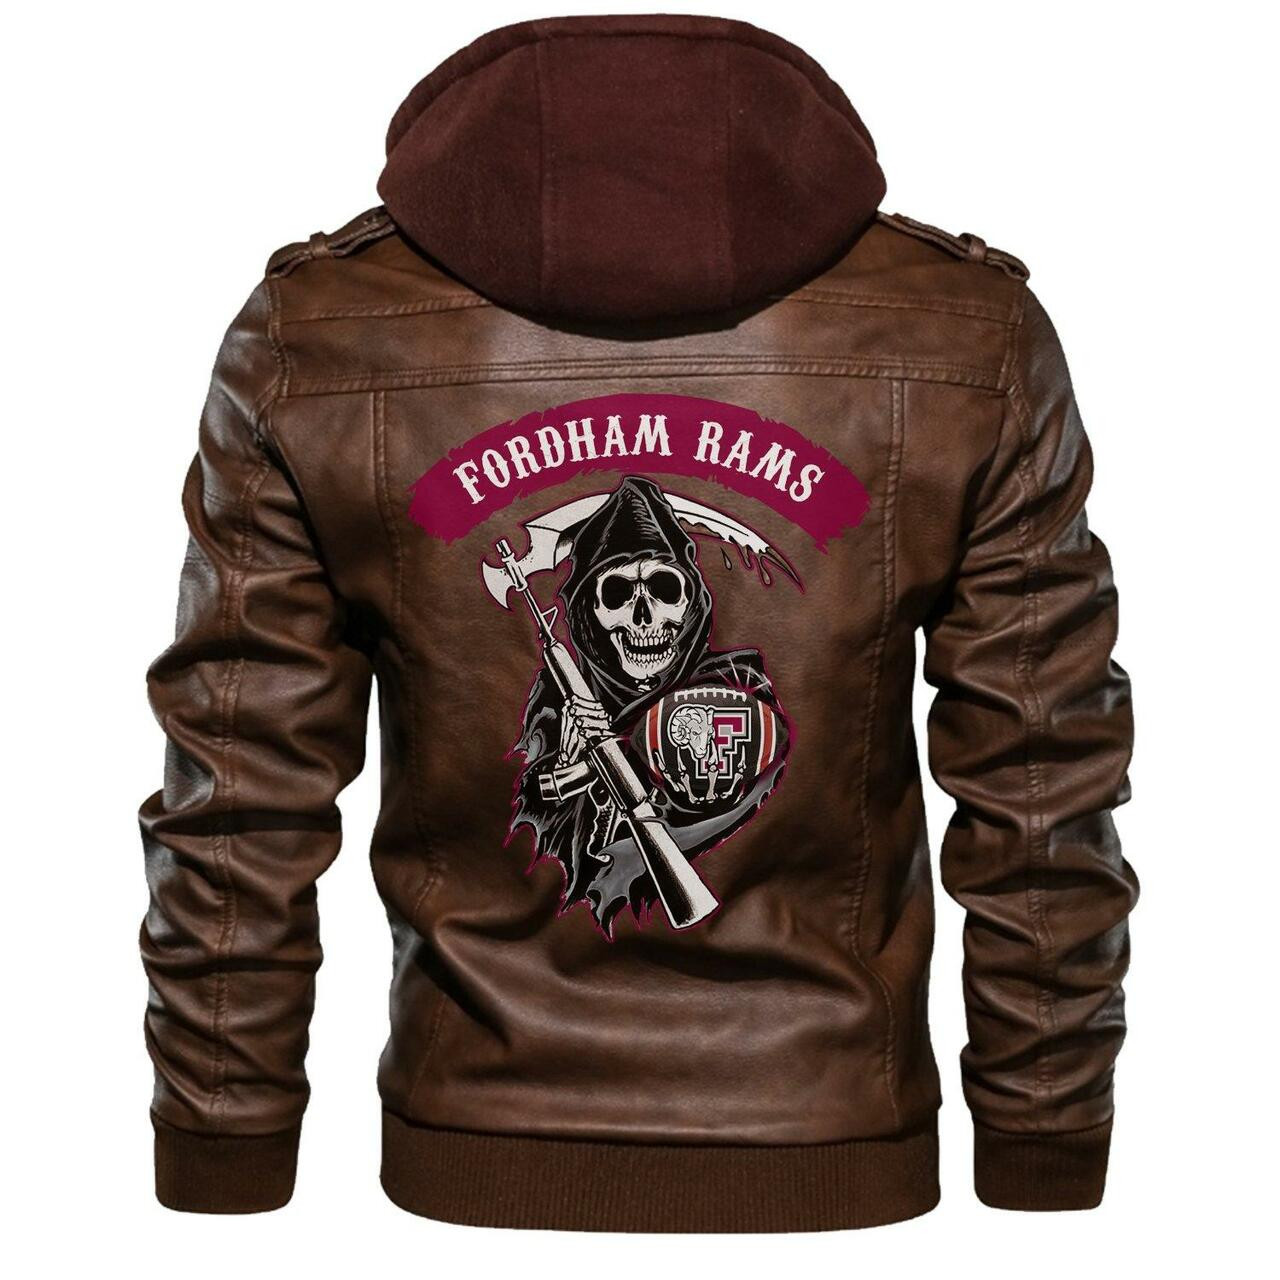 Our store has all of the latest leather jacket 108